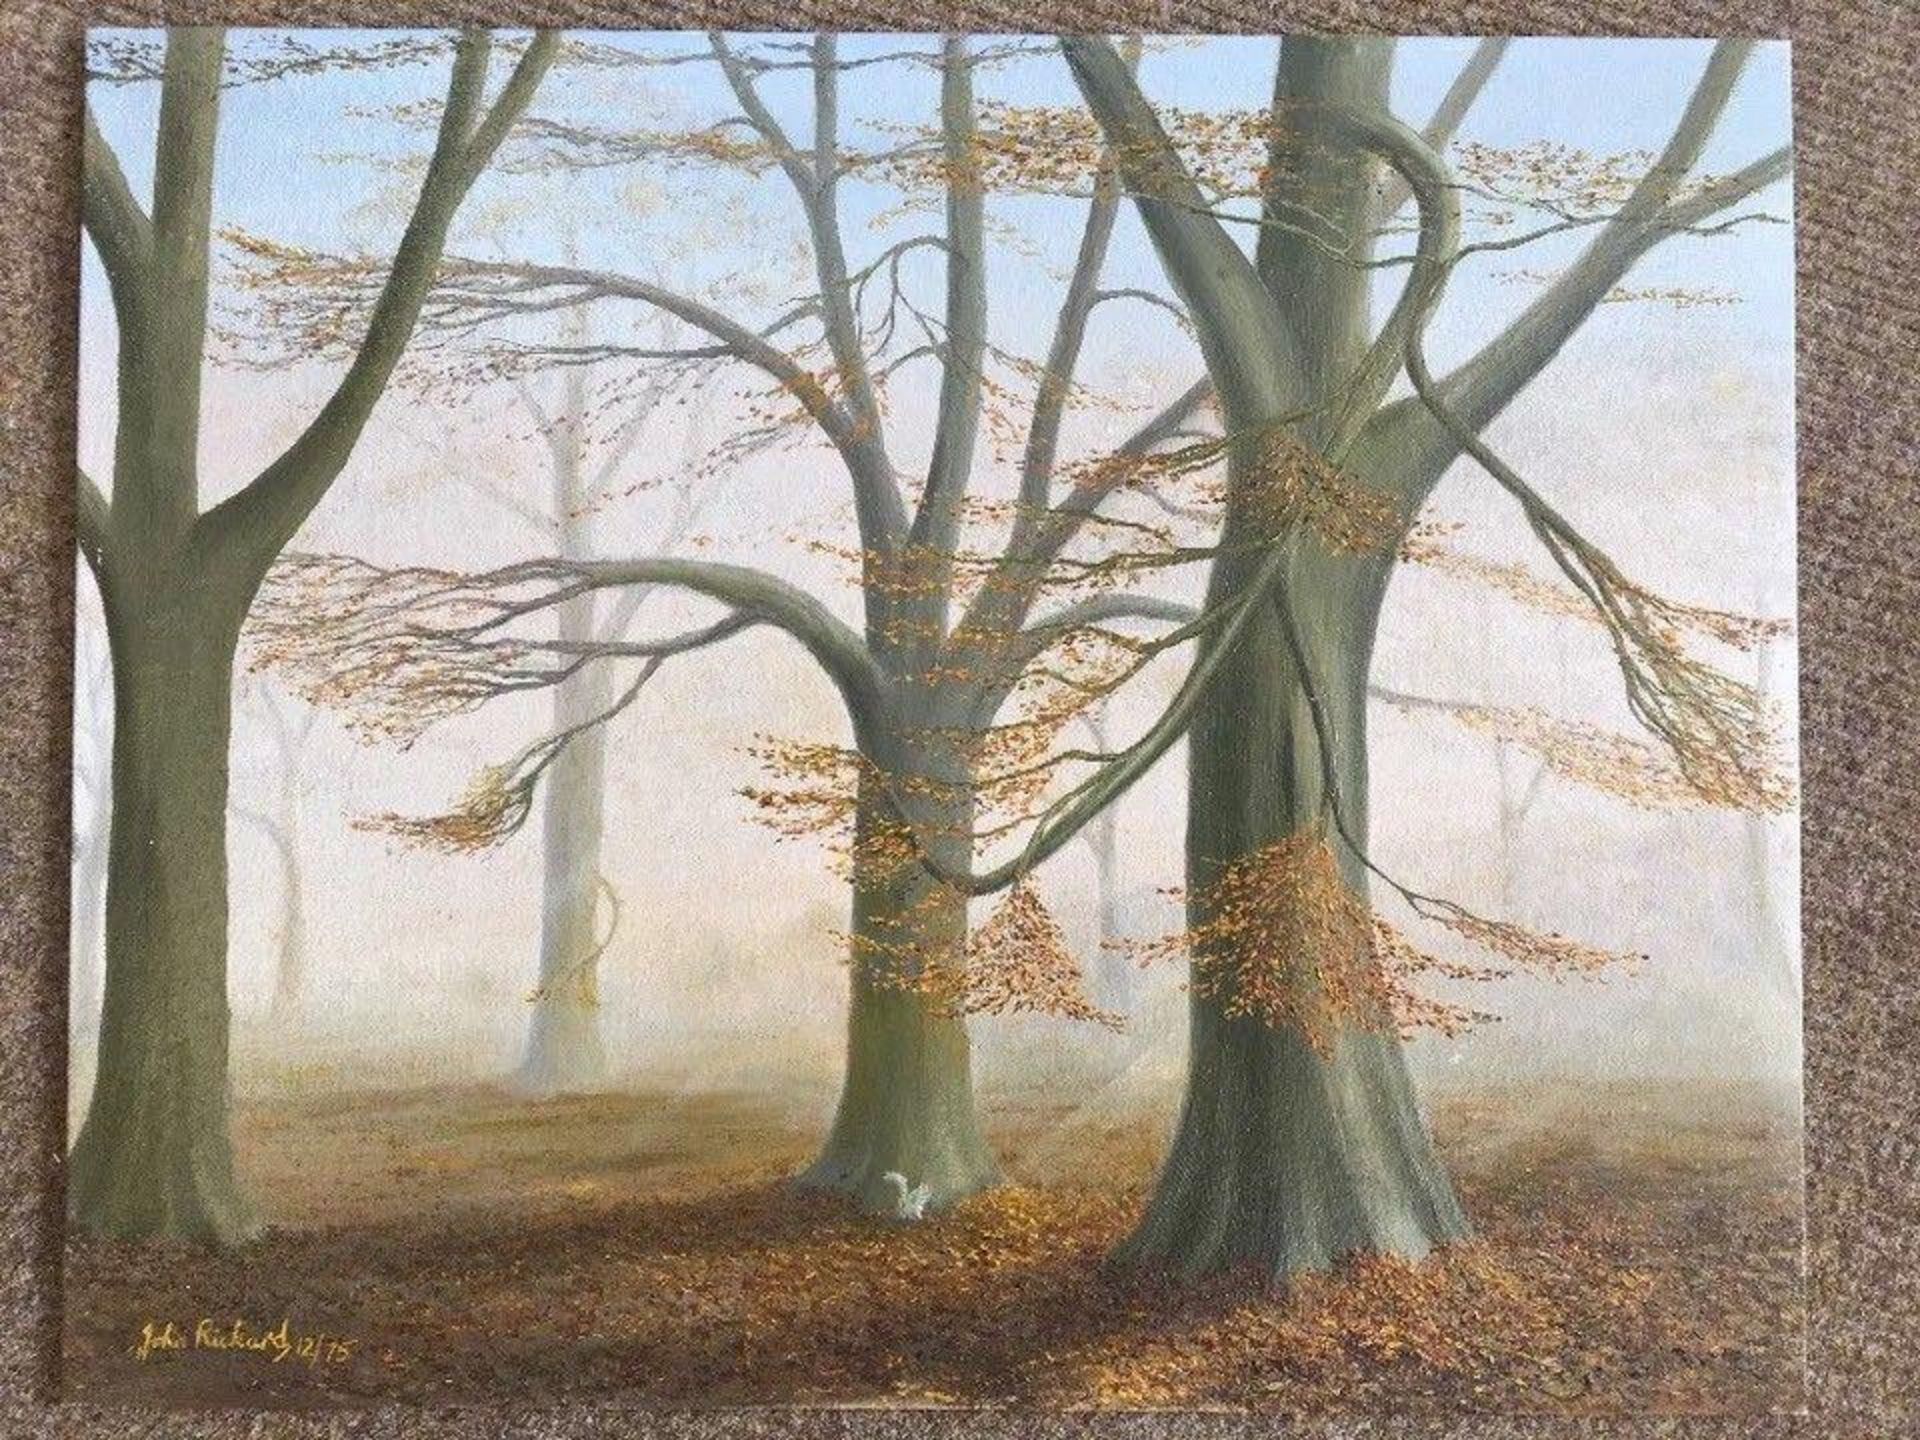 Signed Oil Painting by John Rickard "WOODLAND" 1975